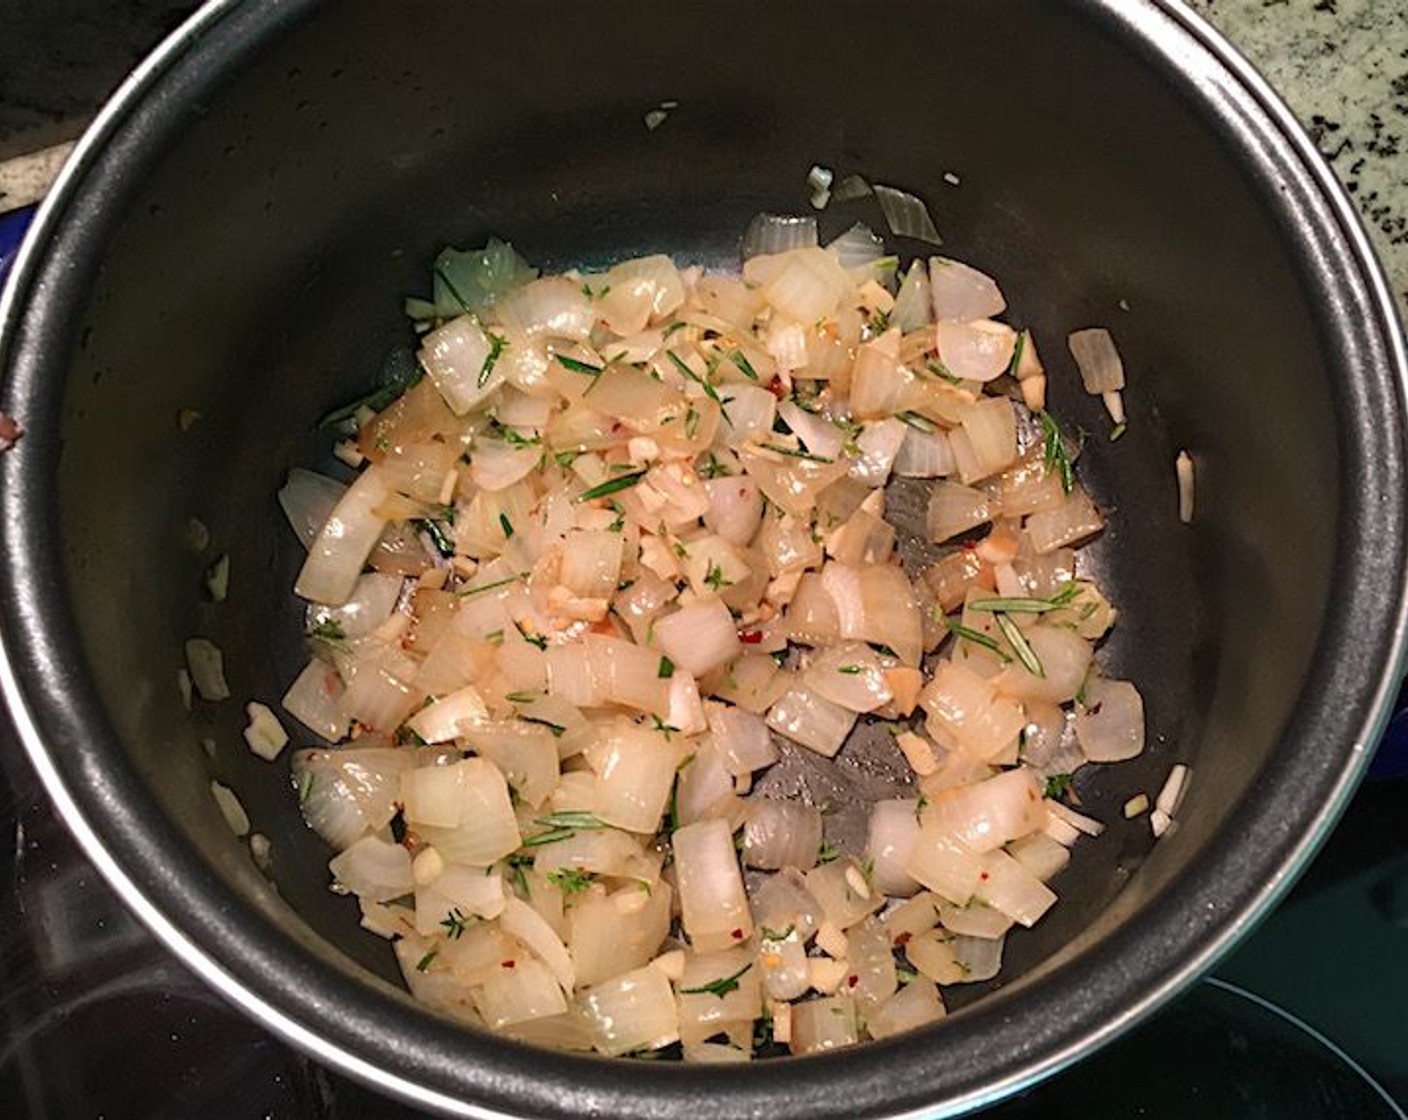 step 16 Add the remaining sliced garlic, chopped rosemary, Fresh Thyme (5 sprigs), Smoked Paprika (1/2 tsp) and Cayenne Pepper (1 pinch) to the pot with the onions and stir to combine.